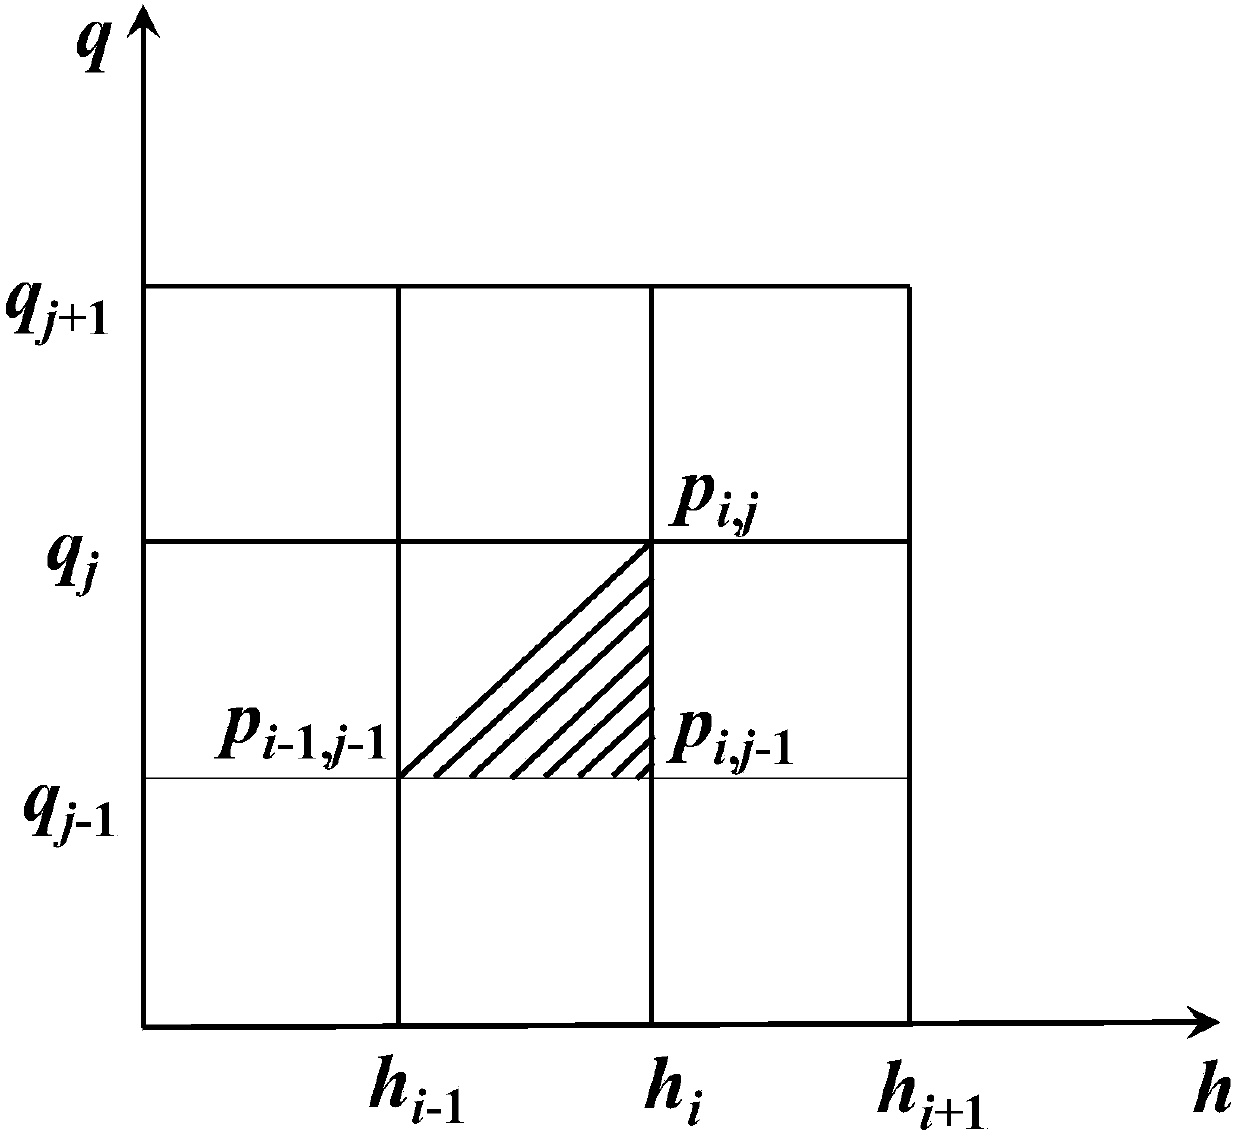 Mixed integer nonlinear programming model for solving combination problem of hydroelectric generating set